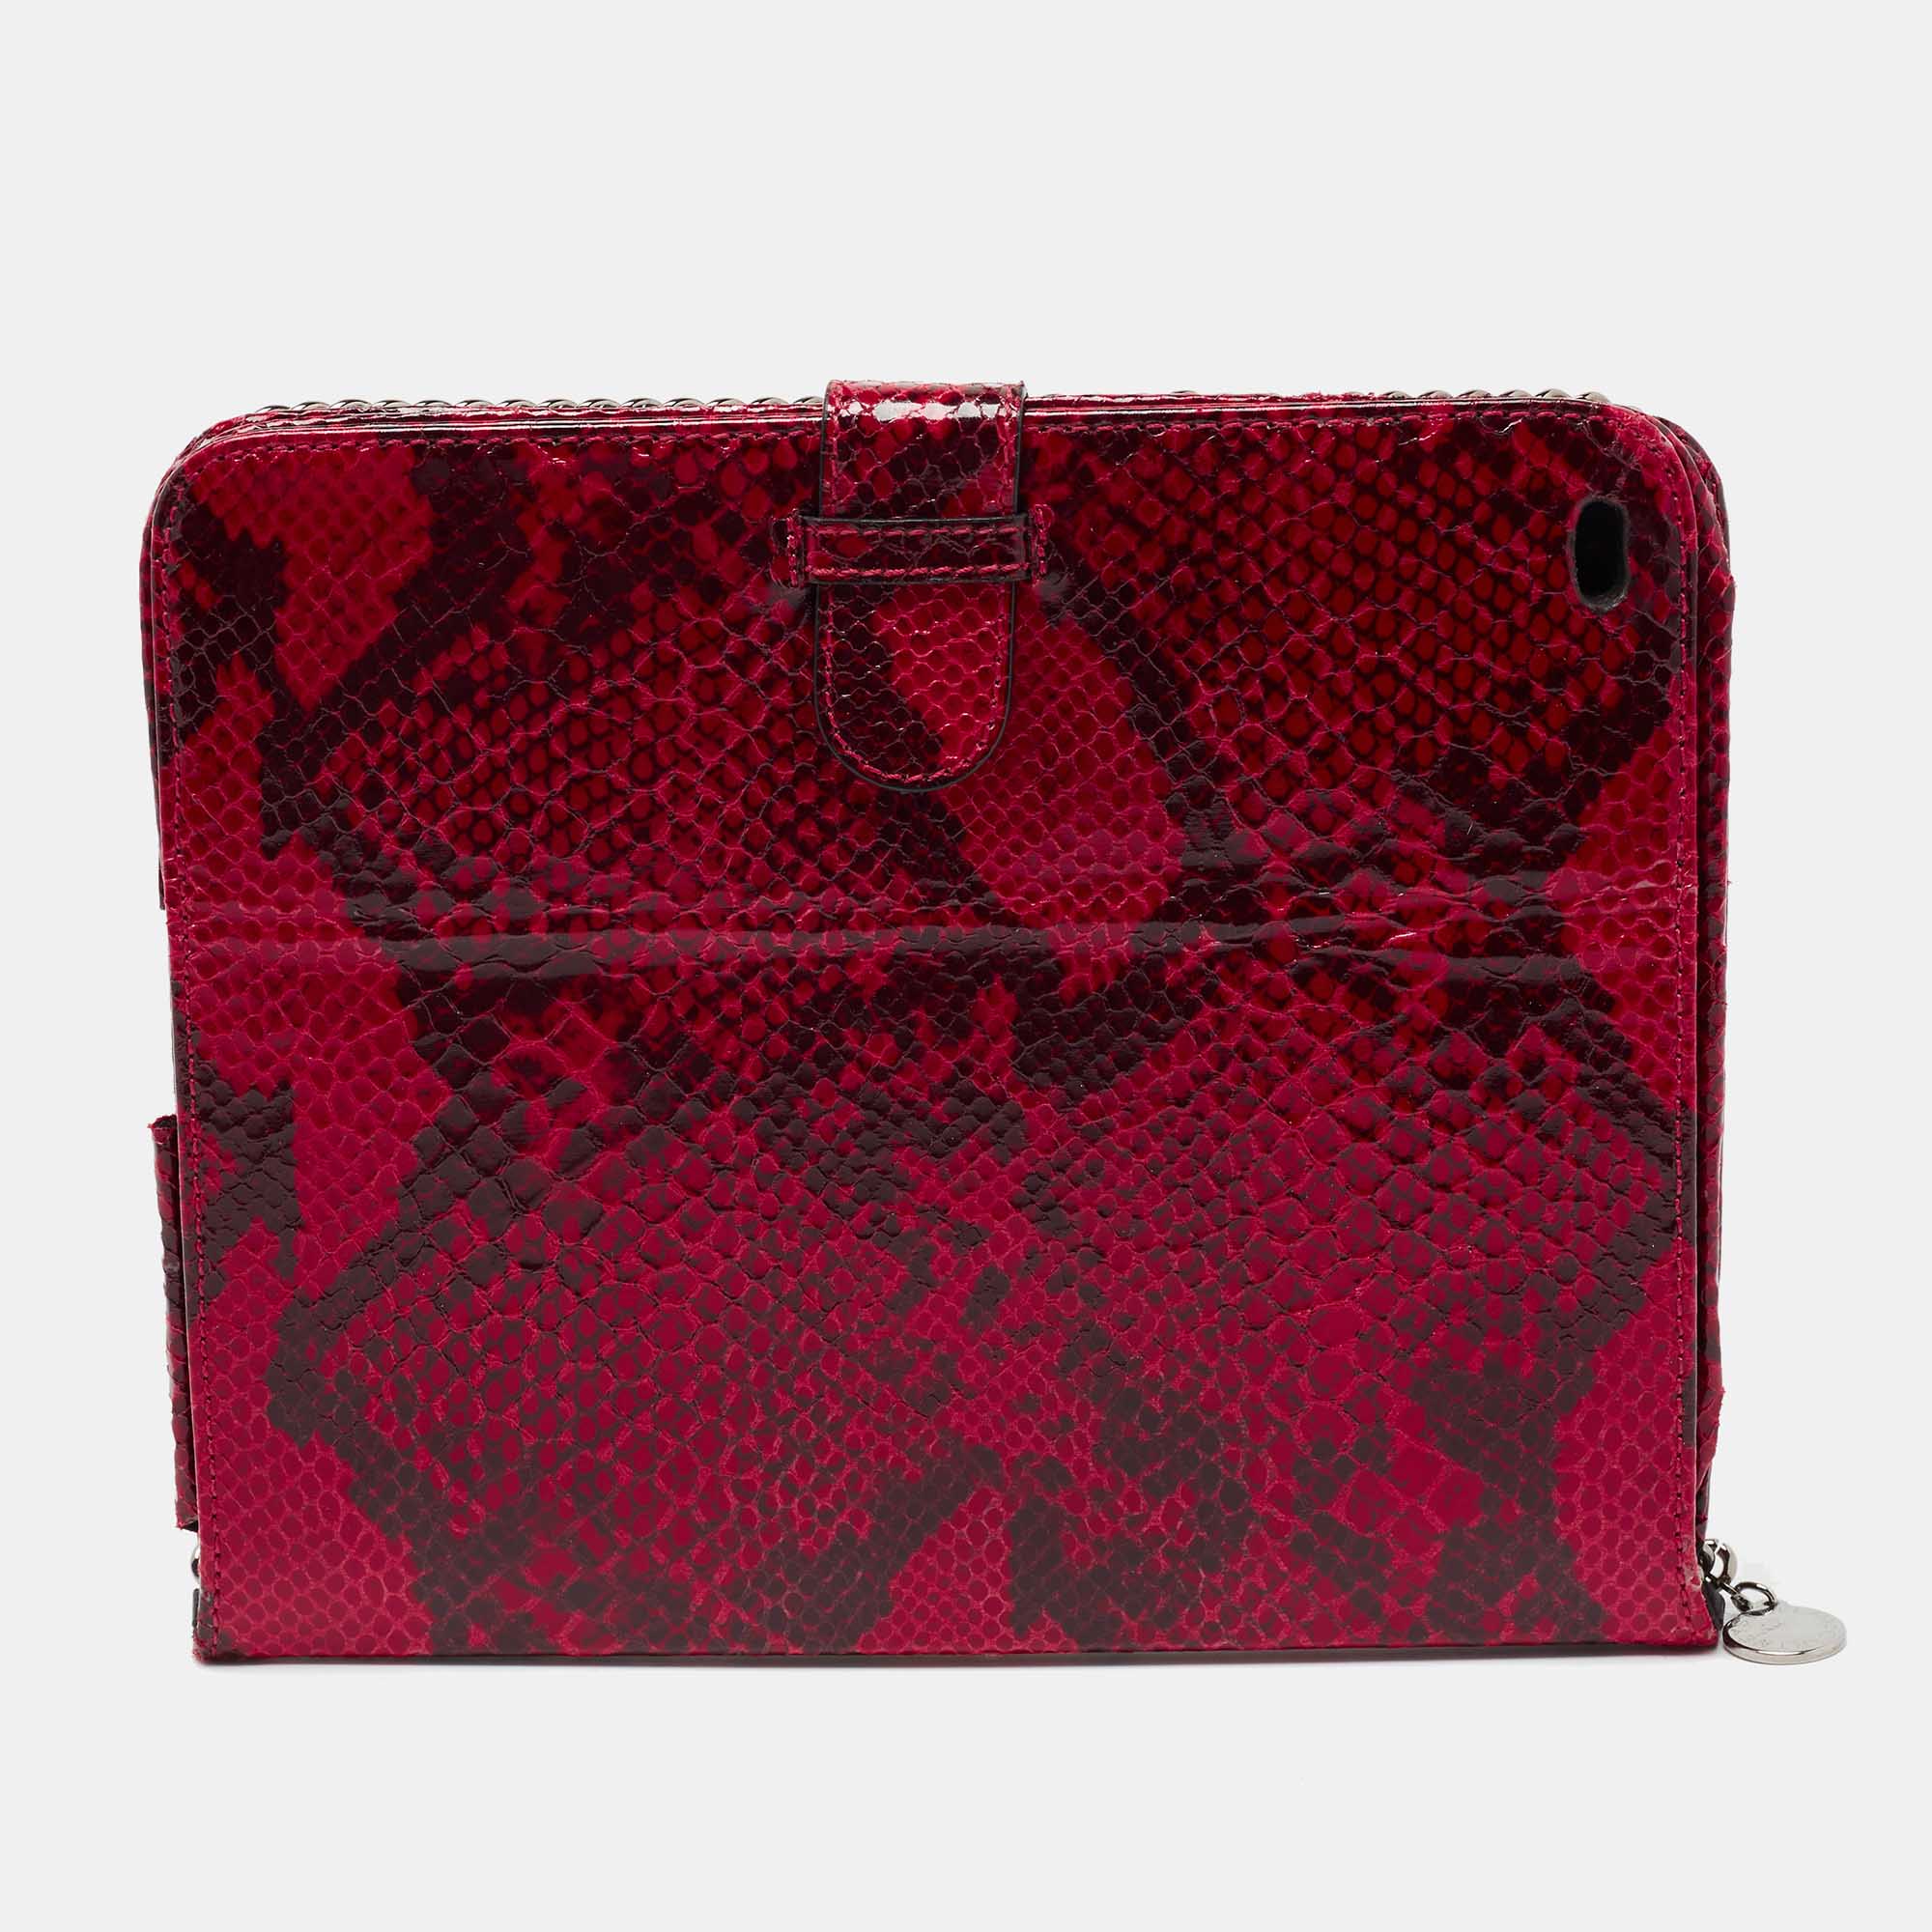 Pre-owned Stella Mccartney Red Faux Python Leather Falabella Ipad 2 Case Holder